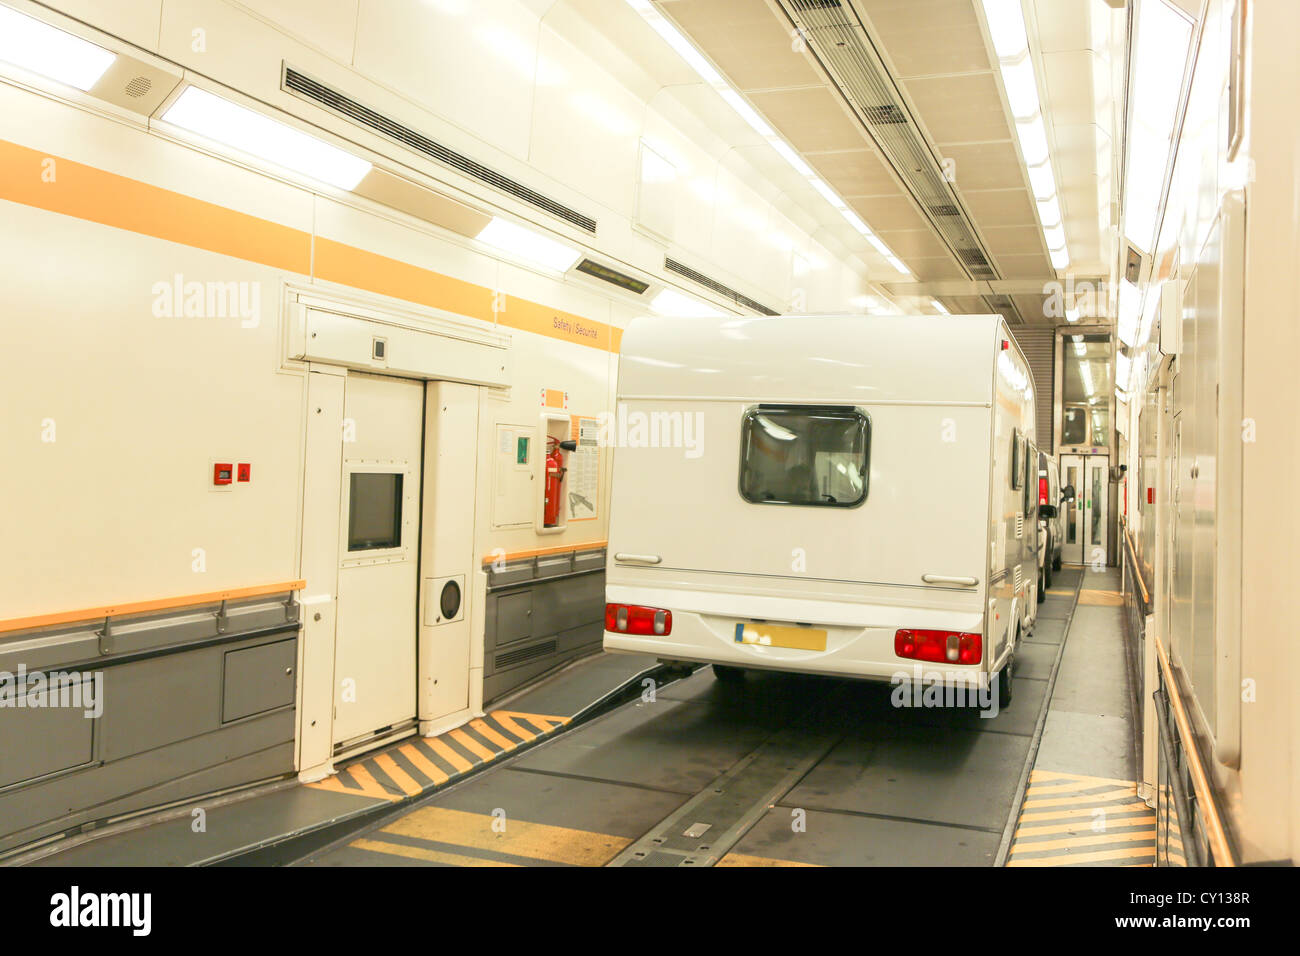 A car and trailer caravan inside a train carriage of a Eurotunnel Le Shuttle traveling through the Channel Tunnel. Stock Photo